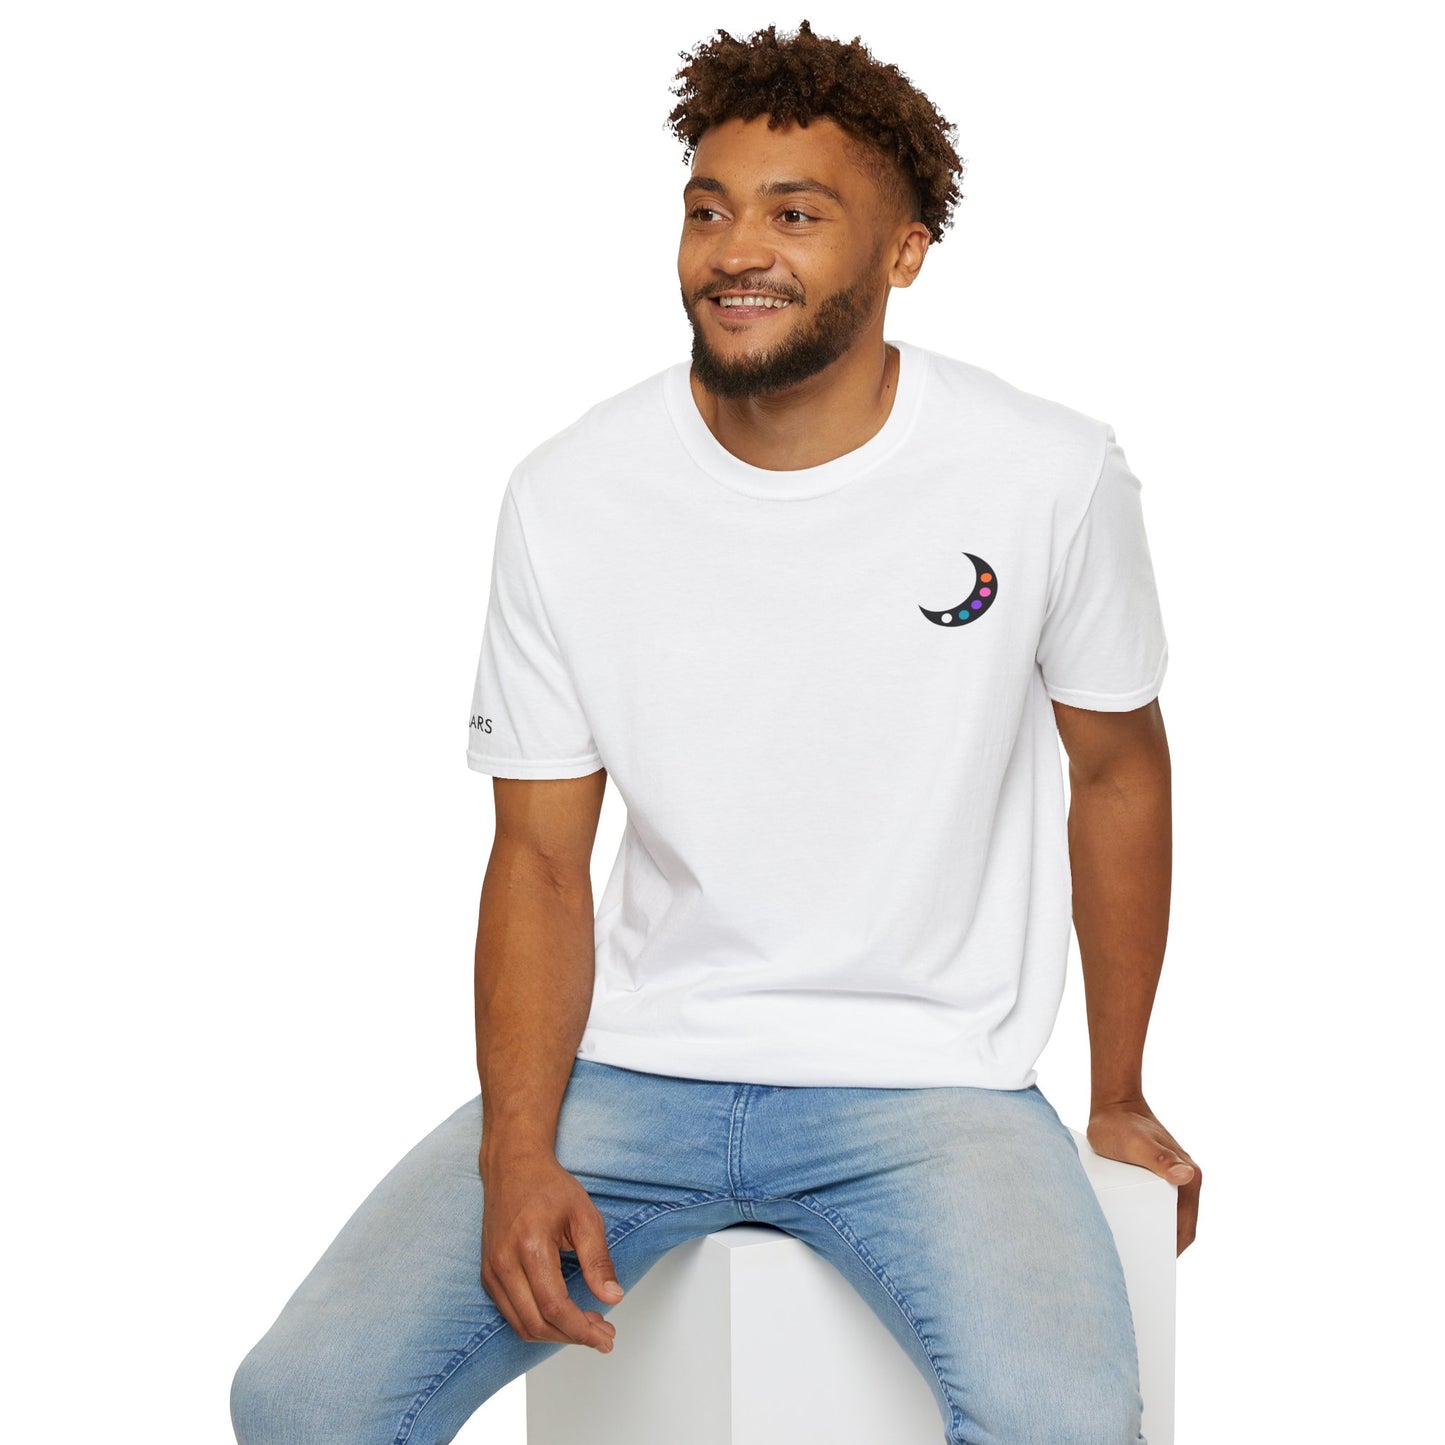 This NFT-Shirt is on the Moon Unisex Softstyle T-Shirt